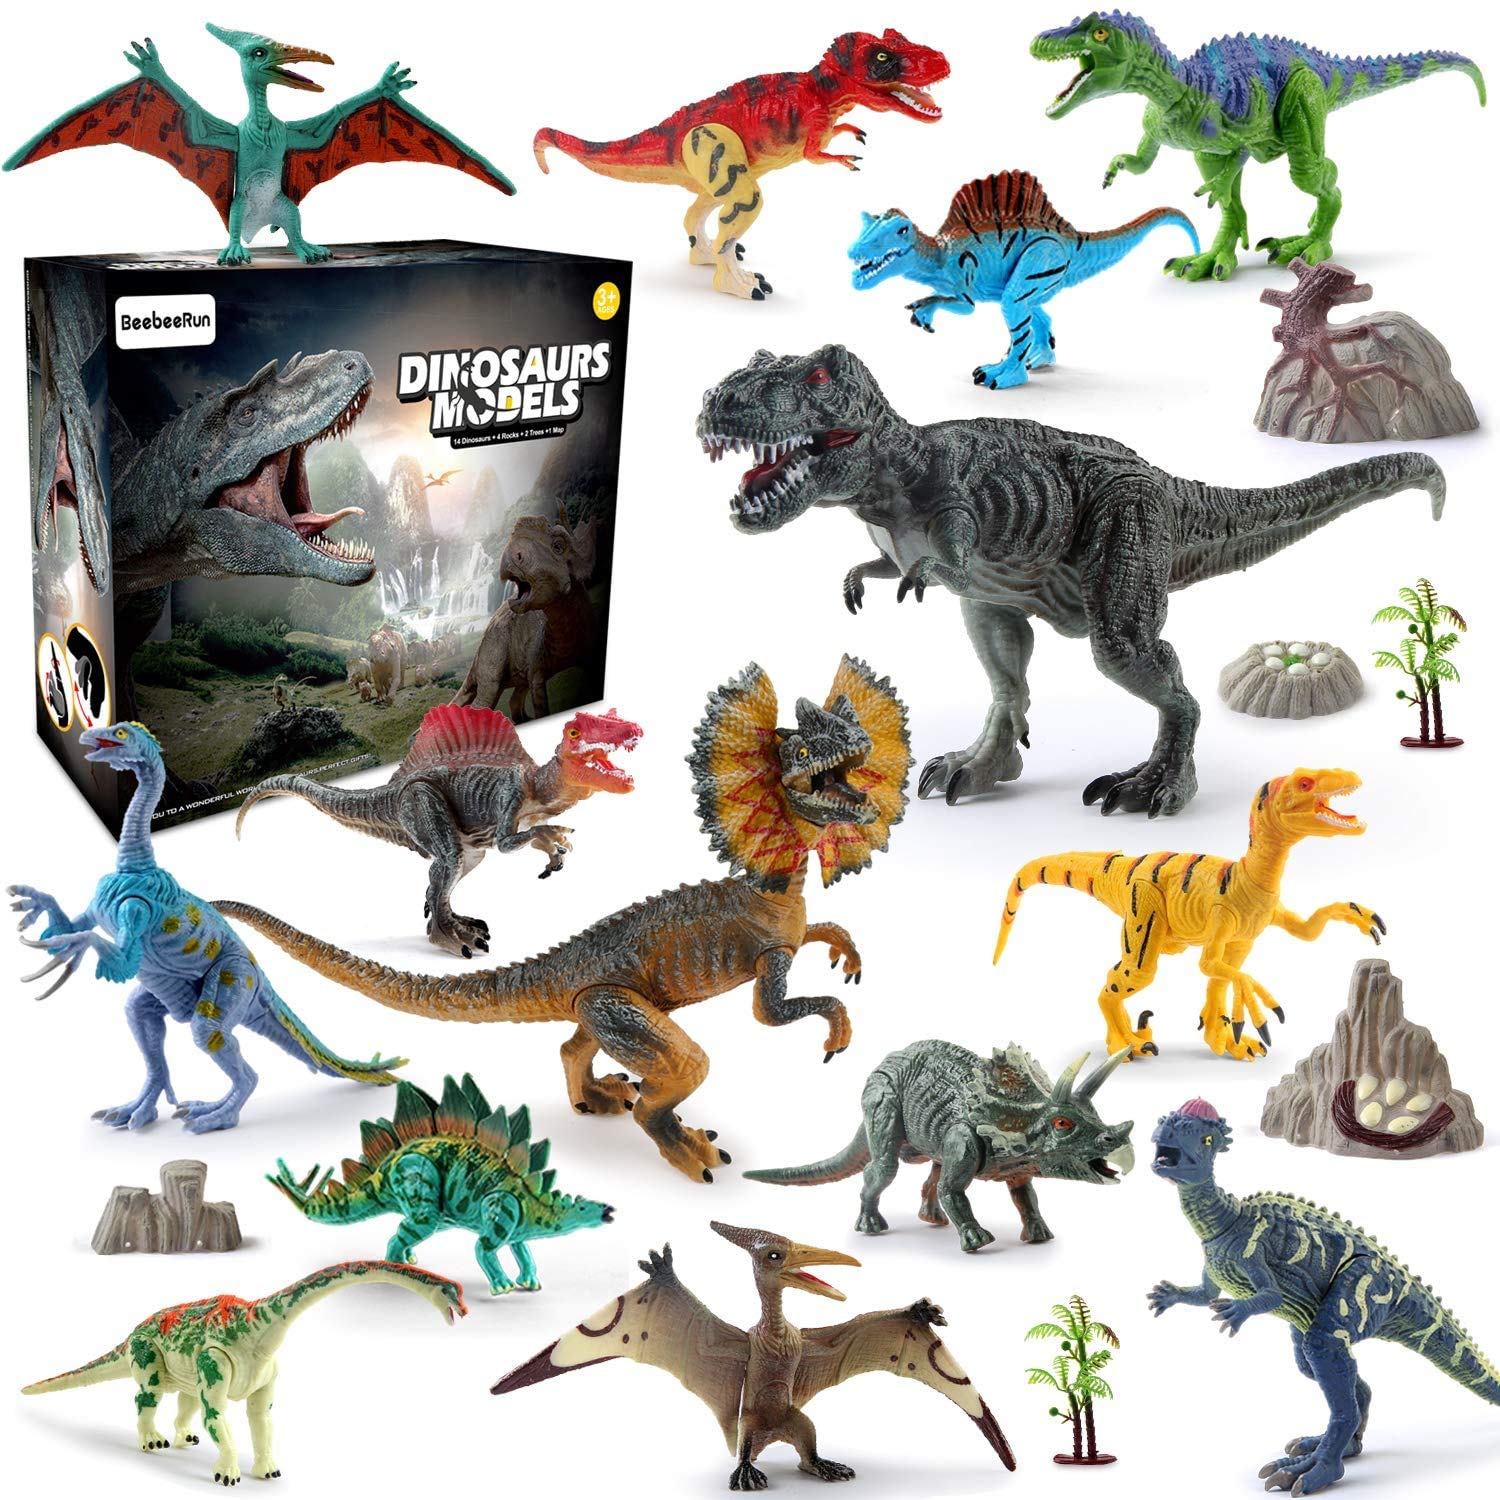 One of Hottest for Wooden Abacus Toy - 21PCS Dinosaur Toys with 5″-10″ Realistic Dinosaur Figures with Movable Jaws Kids Activity Play Mat to Create a Dino World Include T-Rex,Tricerat...